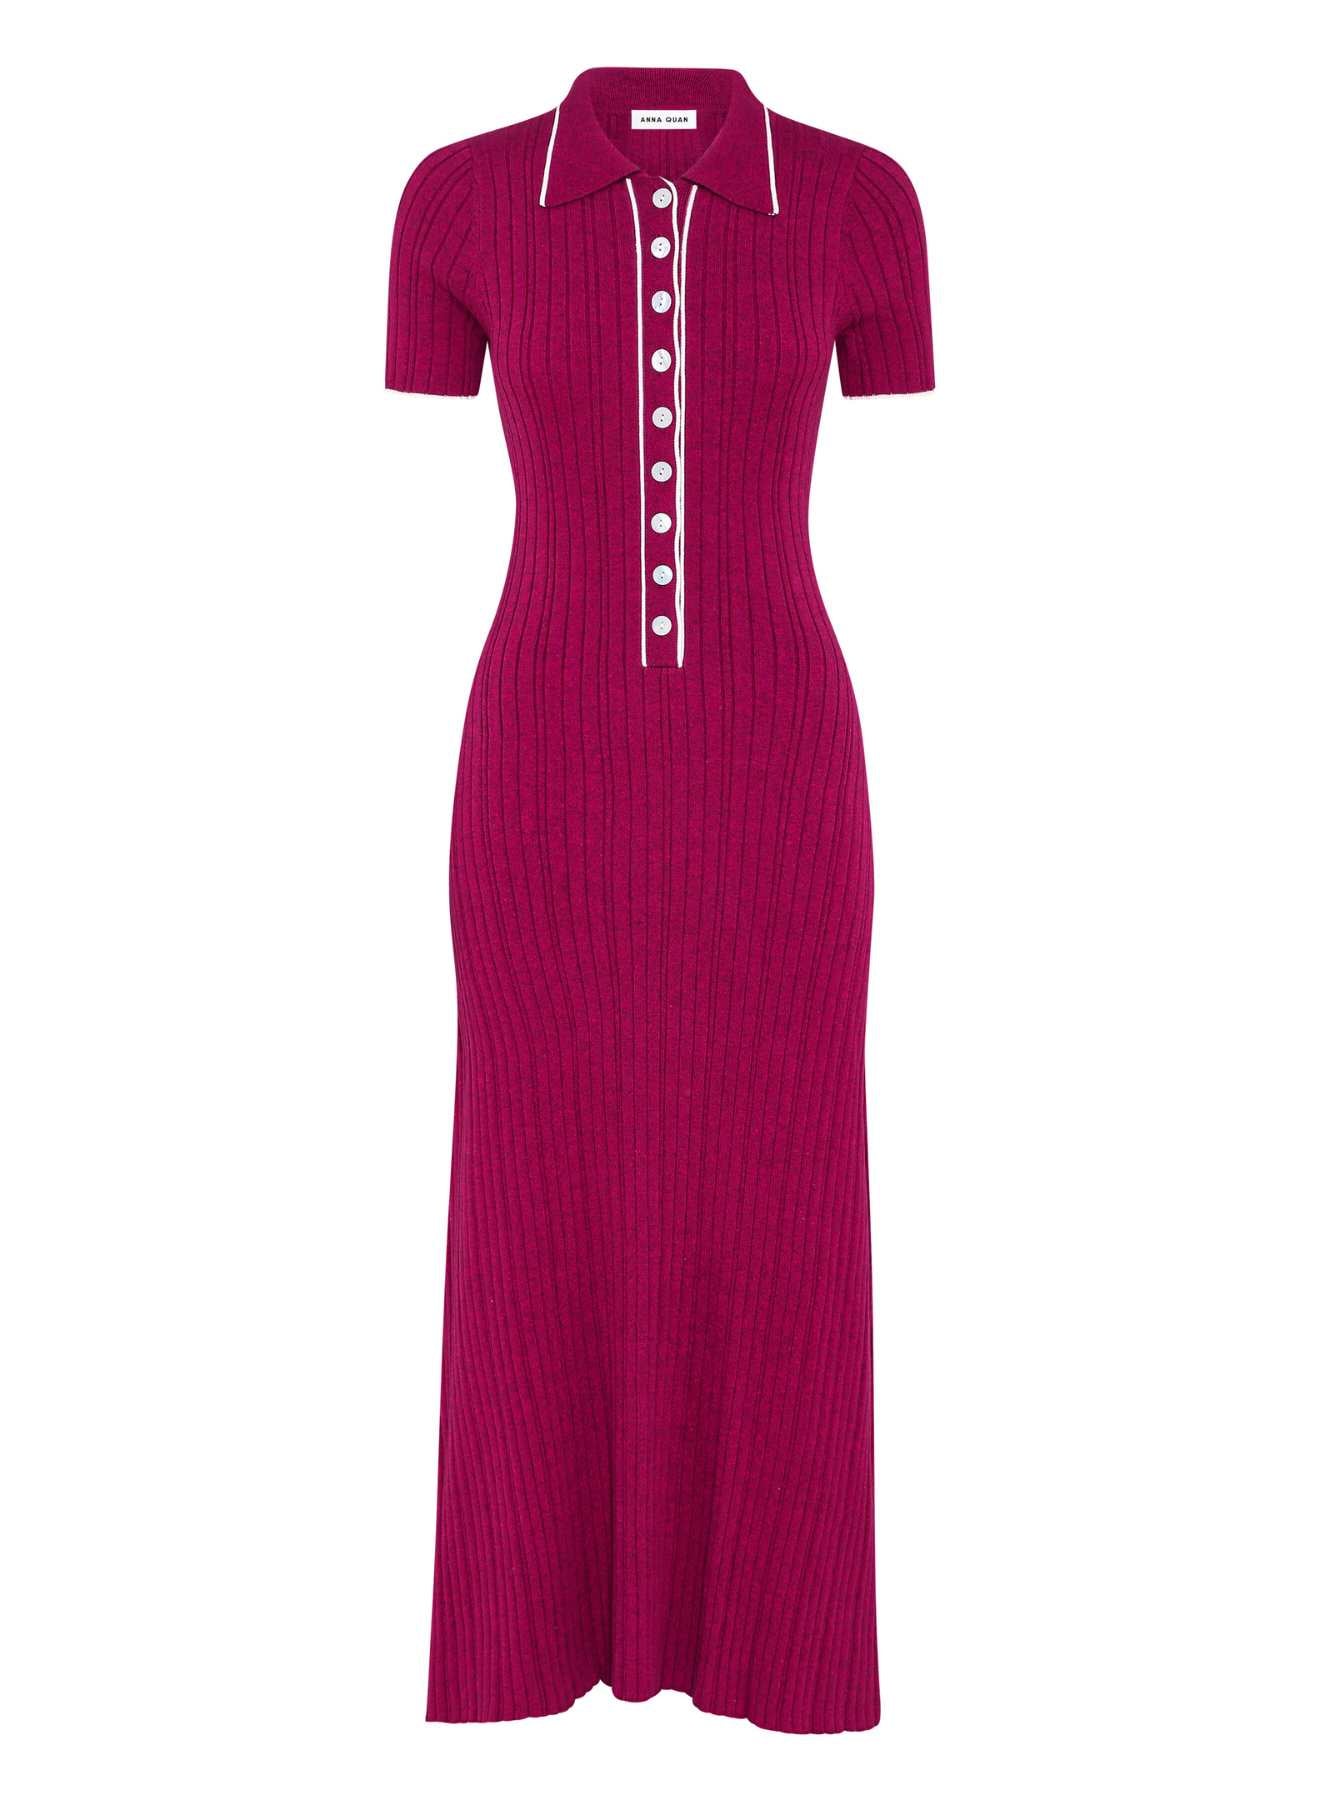 ANNA QUAN's best-selling Rib Knit Cotton Maxi Dress, showcasing a stylish polo neckline, contrasting buttons, short sleeves, a-line skirt and hem skimming the ankle. Everyday dress, day dress, work dress, casual dress, lunch dress.